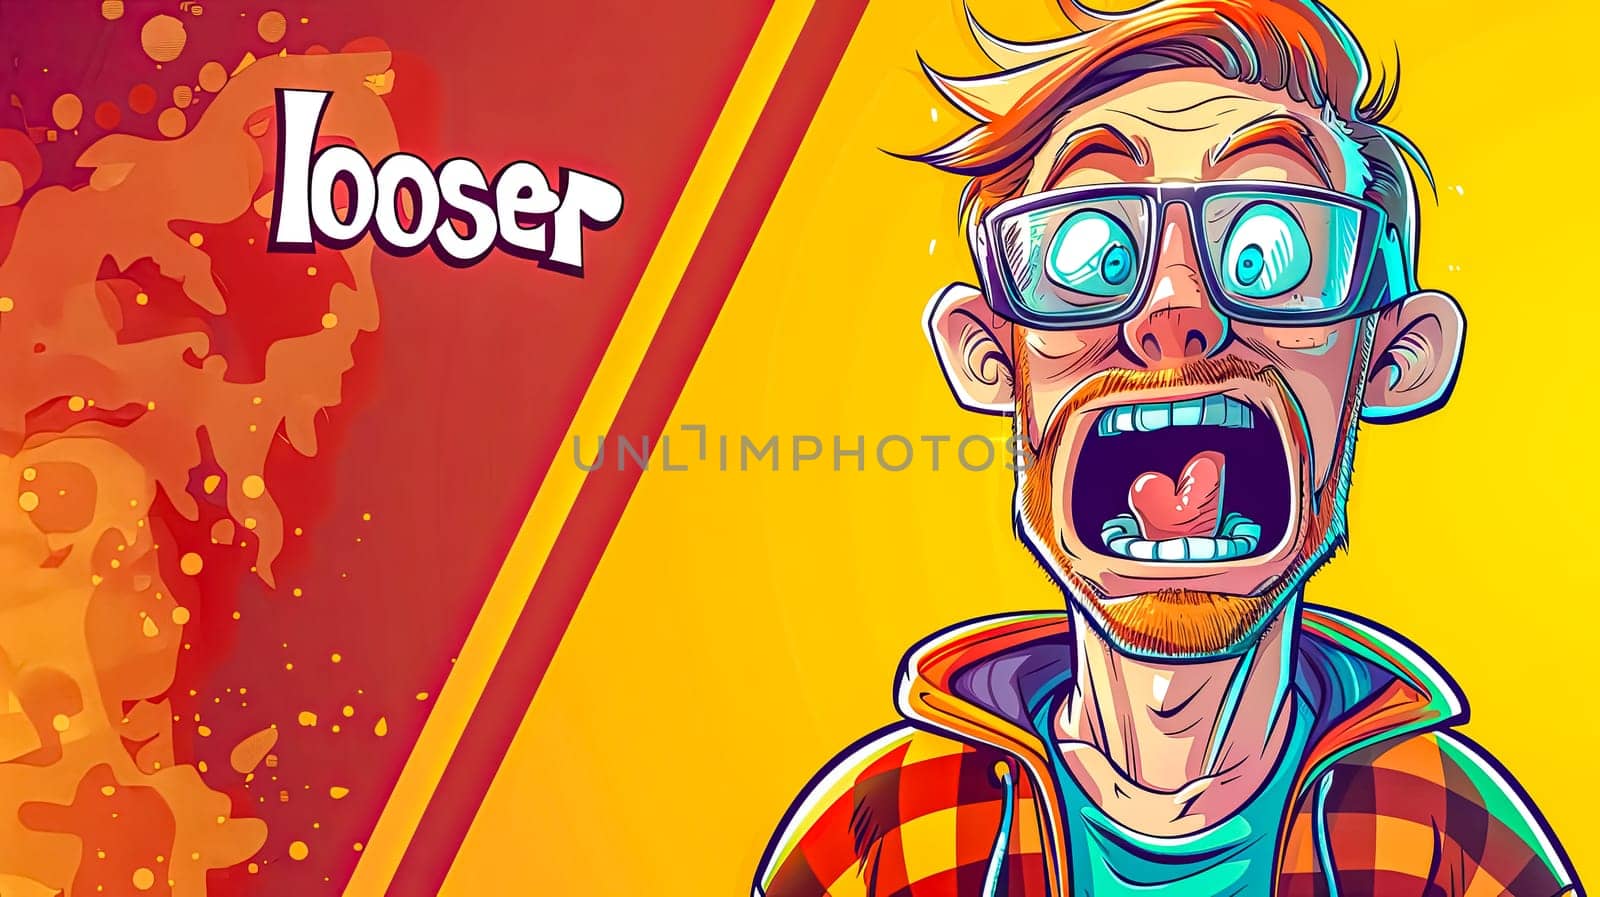 Colorful illustration of a nerdy character with enamored facial expression